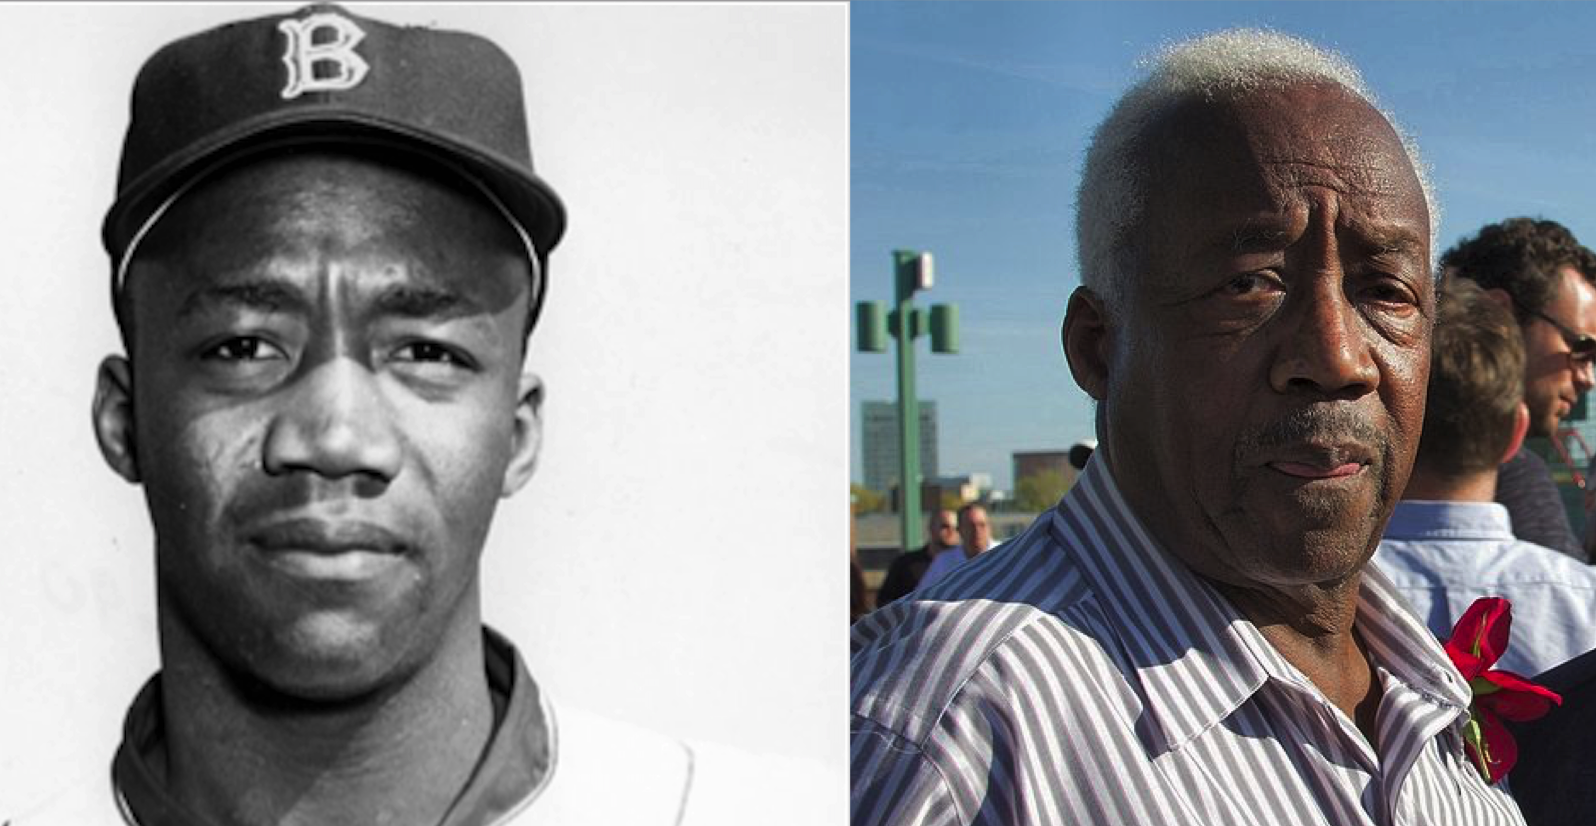 FenwayNation—Red Sox, Mookie, J.D., Bogaerts, Sale, JBJ—Founded  1/27/2000—9-Time Champs: Elijah Jerry 'Pumpsie' Green Turns 83 Years Old  Today